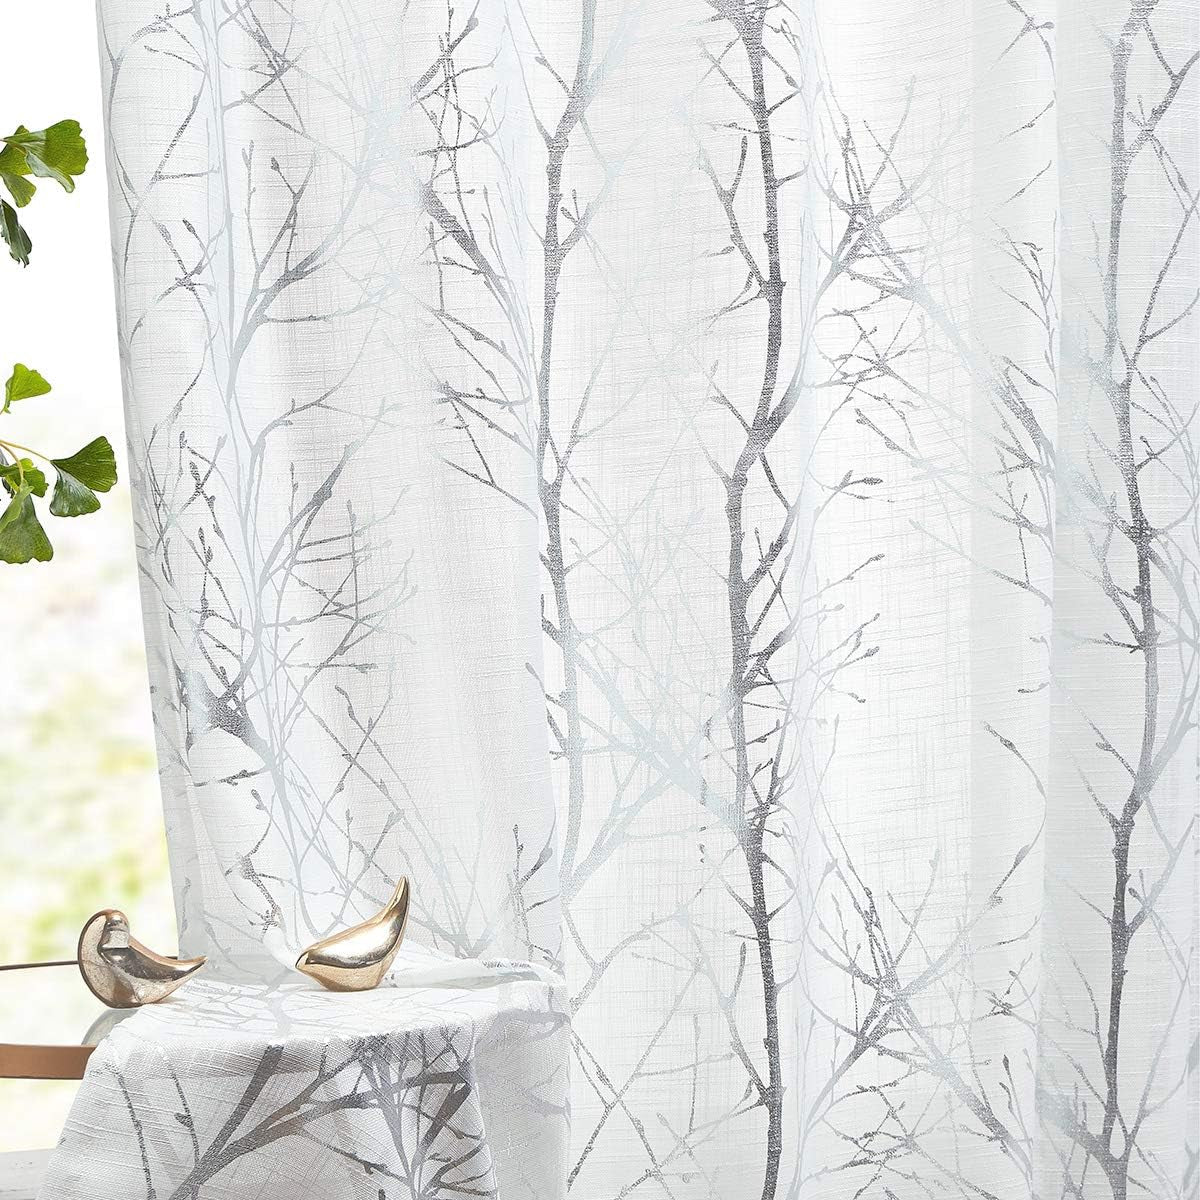 FMFUNCTEX Blue White Curtains for Kitchen Living Room 72“ Grey Tree Branches Print Curtain Set for Small Windows Linen Textured Semi-Sheer Drapes for Bedroom Grommet Top, 2 Panels  Fmfunctex Semi-Sheer: White + Foil Silver 50" X 45" |2Pcs 